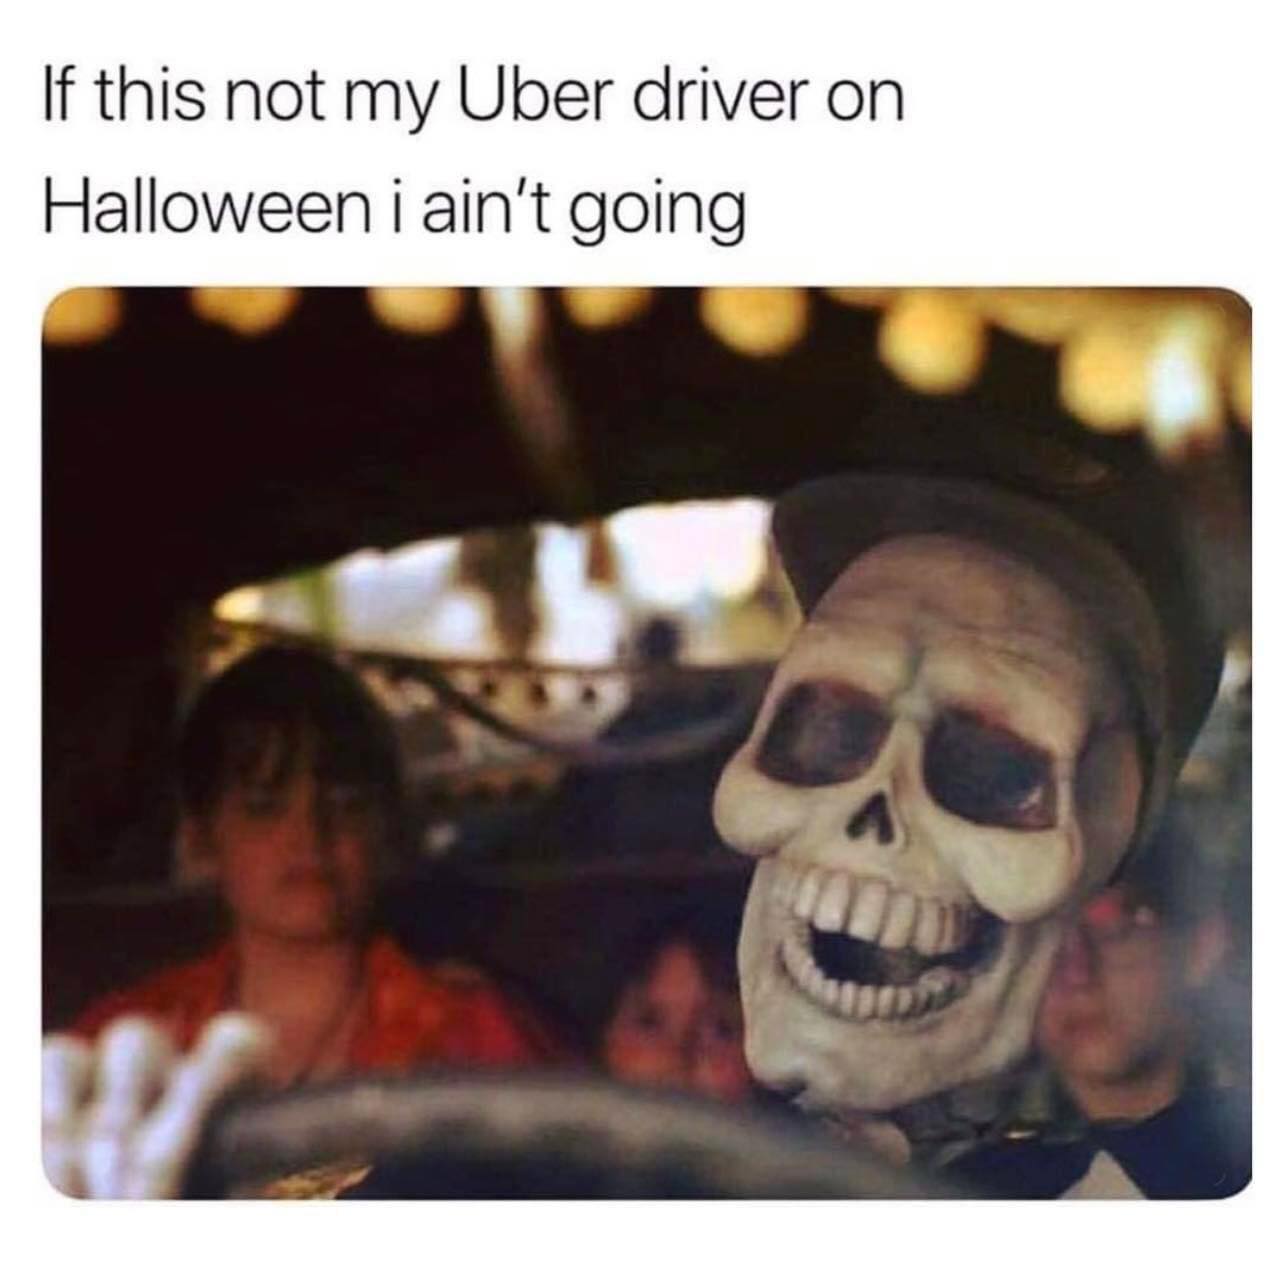 monday morning randomness - Internet meme - If this not my Uber driver on Halloween i ain't going